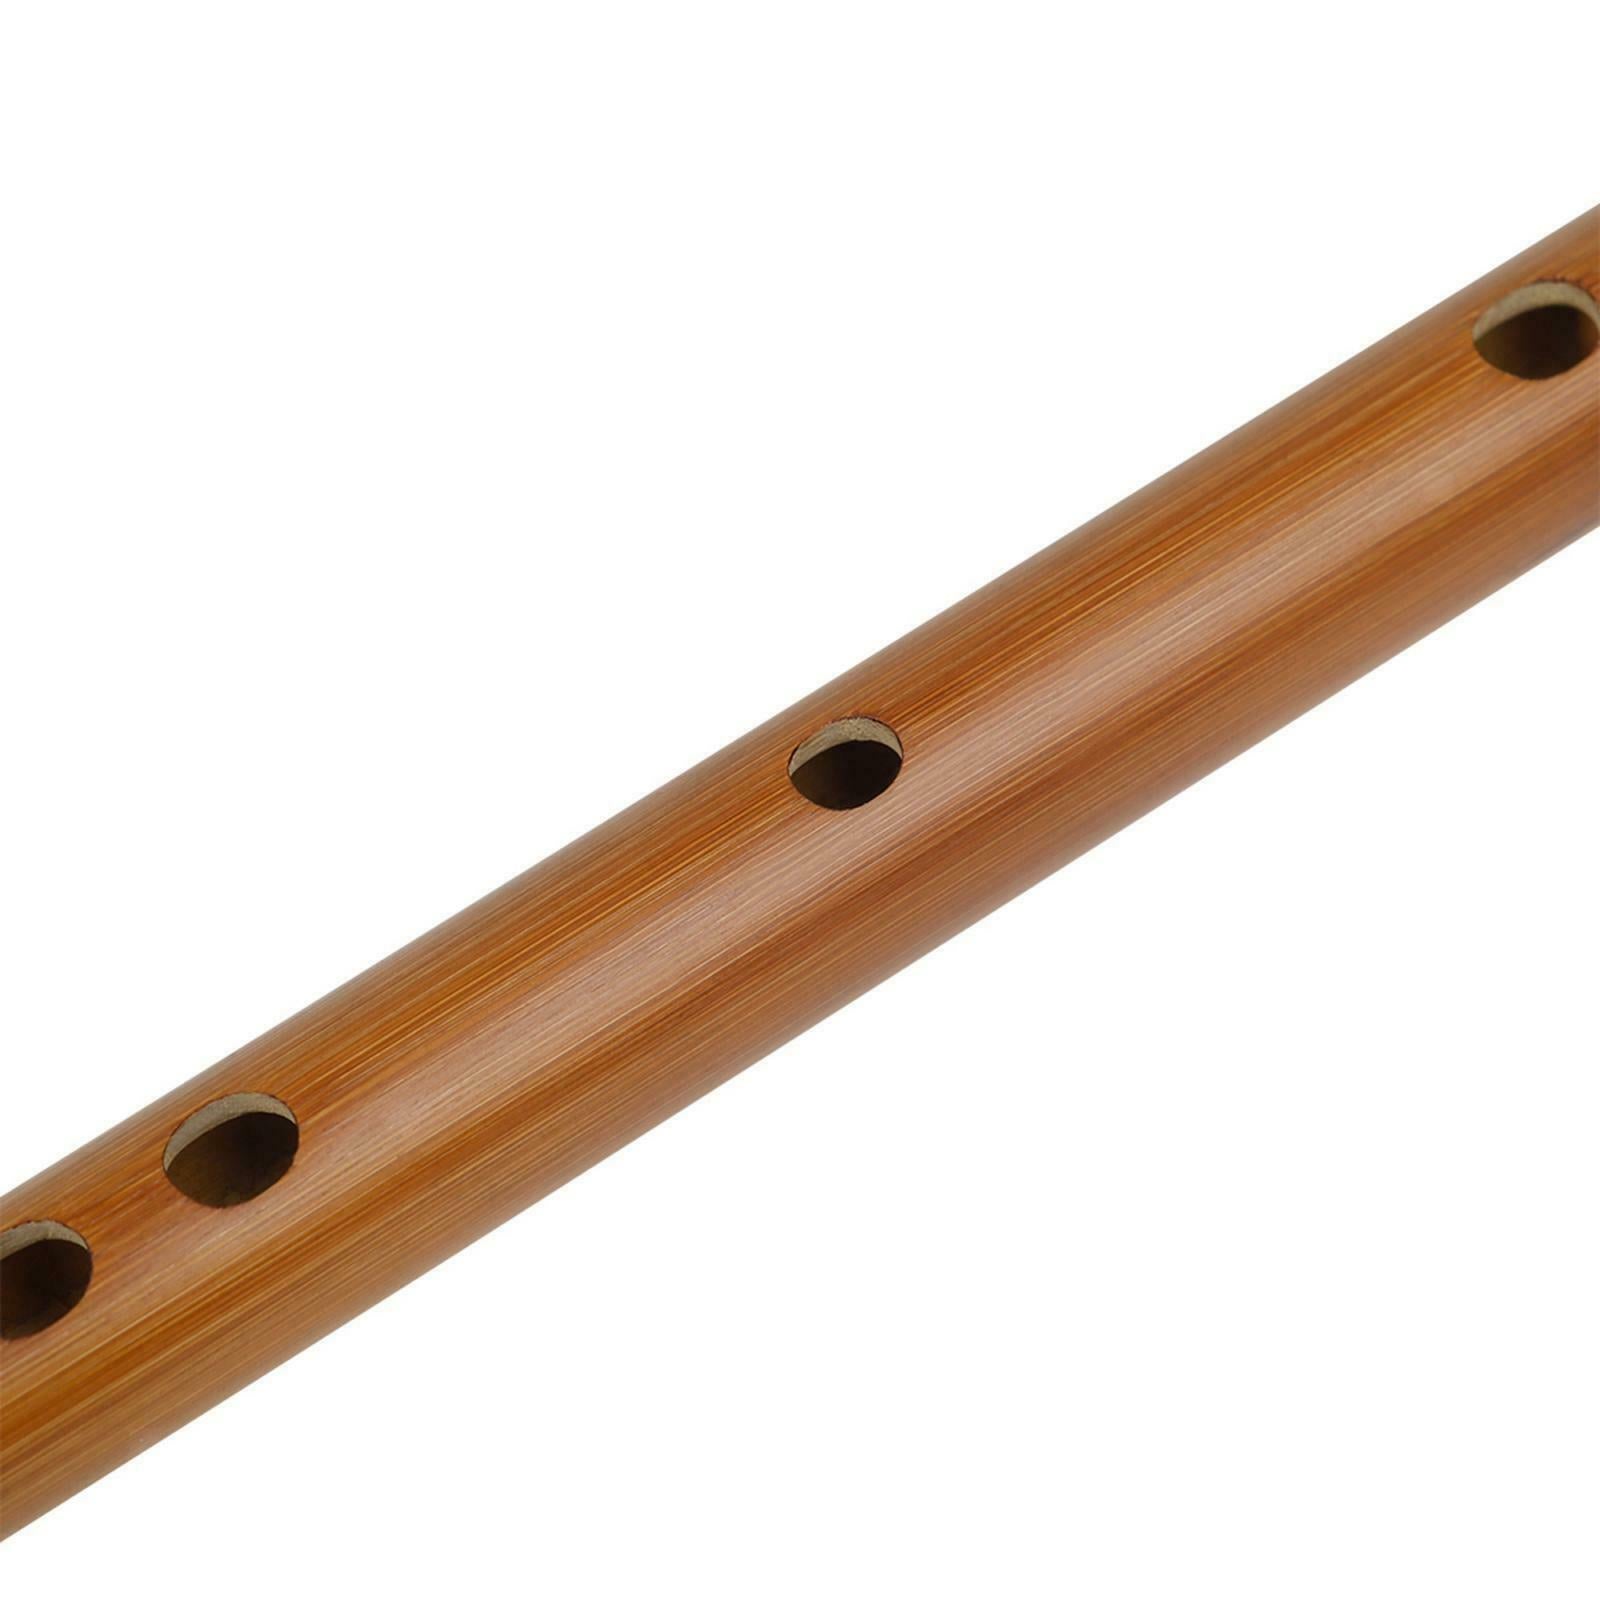 Traditional Wooden Flute Great Sound Woodwind Musical Instrument Gift Key G